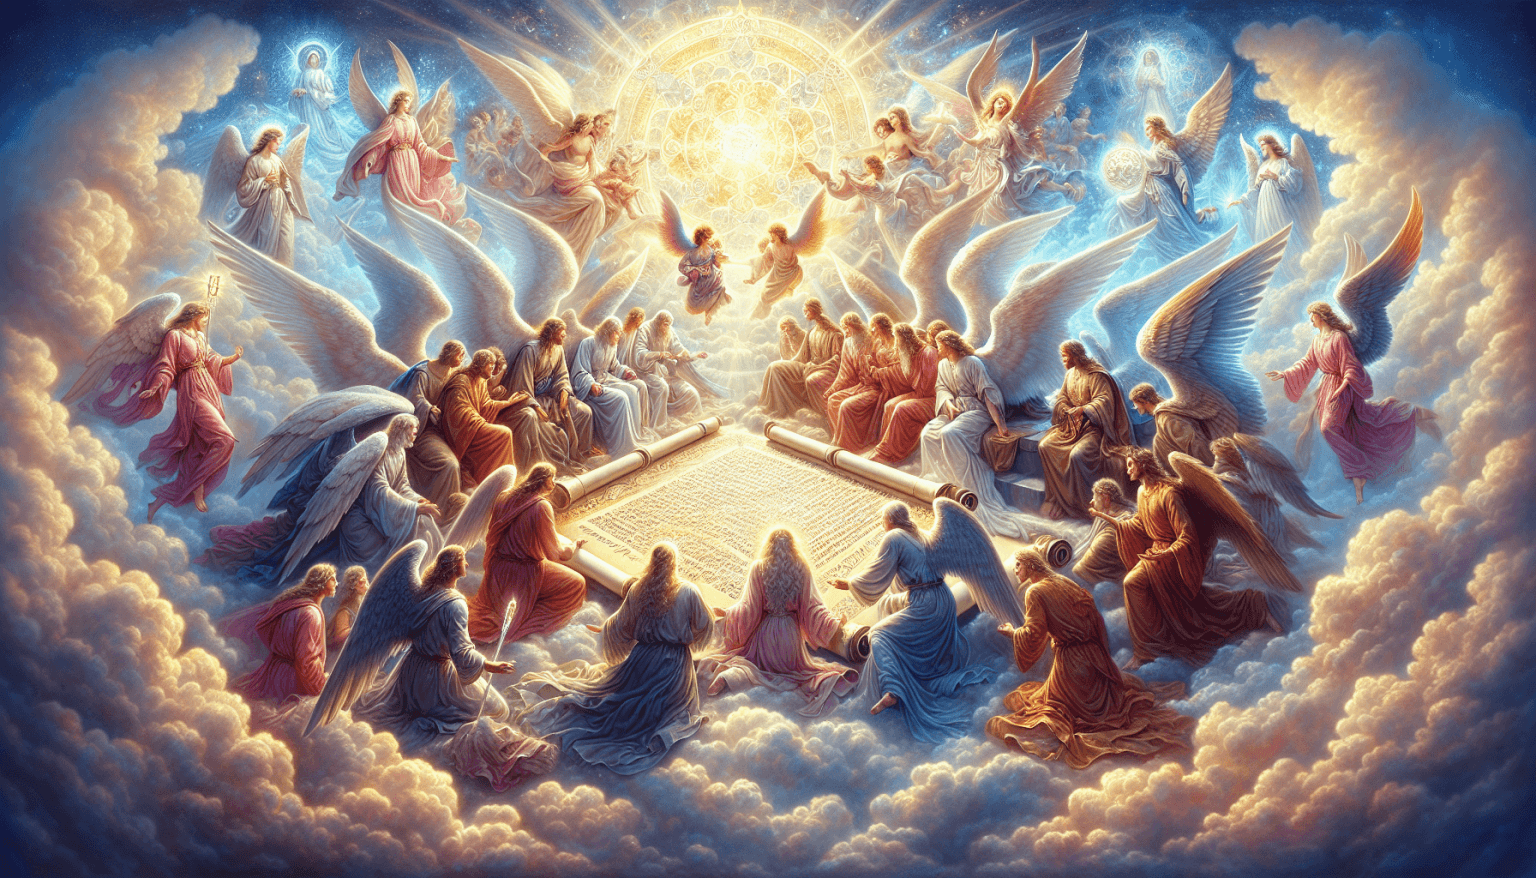 An ethereal depiction of a celestial meeting, with radiant angels and divine figures gathered around an intricate, ancient scroll, set against a backdrop of heavenly clouds and soft, glowing light, il